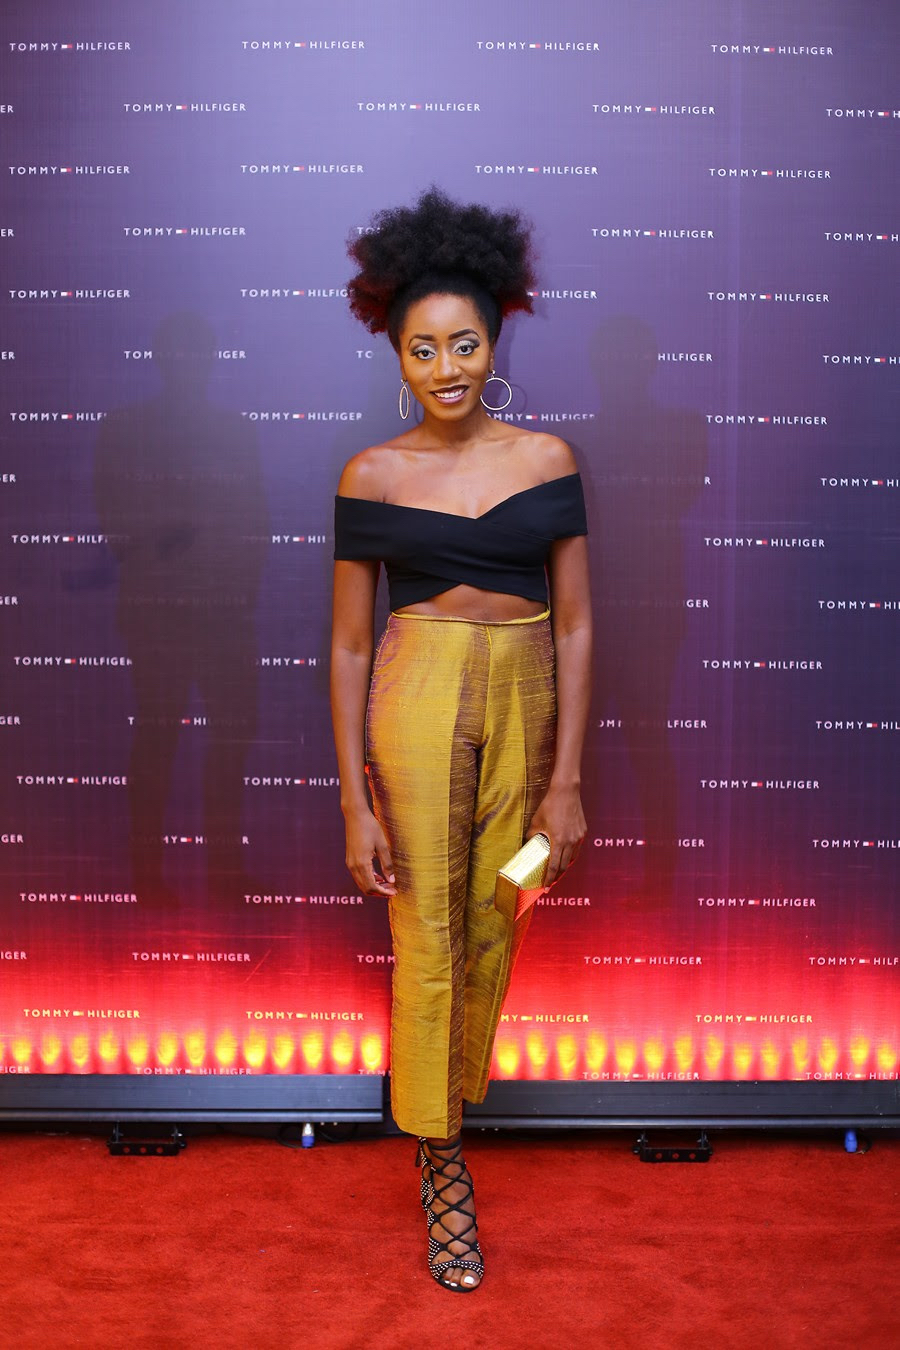 All That Happened At Tommy Hilfiger’s Spring 2018 Collection Launch in Lagos